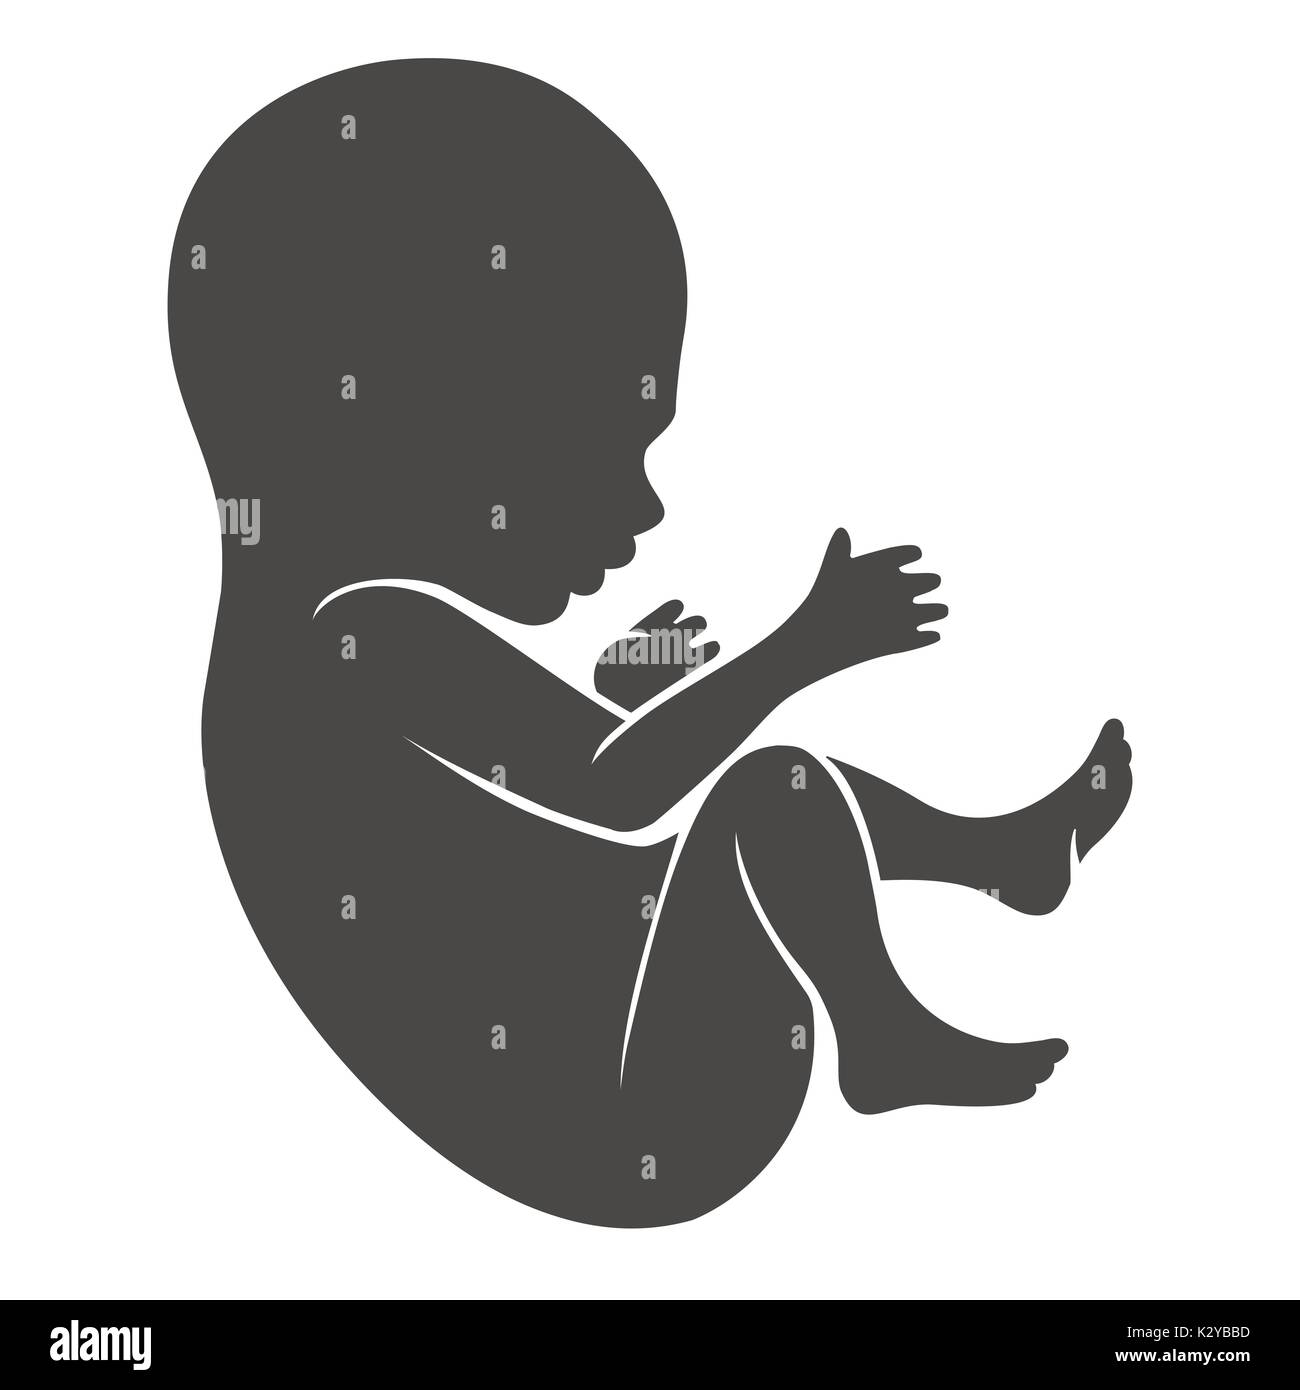 Human fetus icon or newborn and unborn baby silhouette isolated on white background. Vector illustration Stock Vector